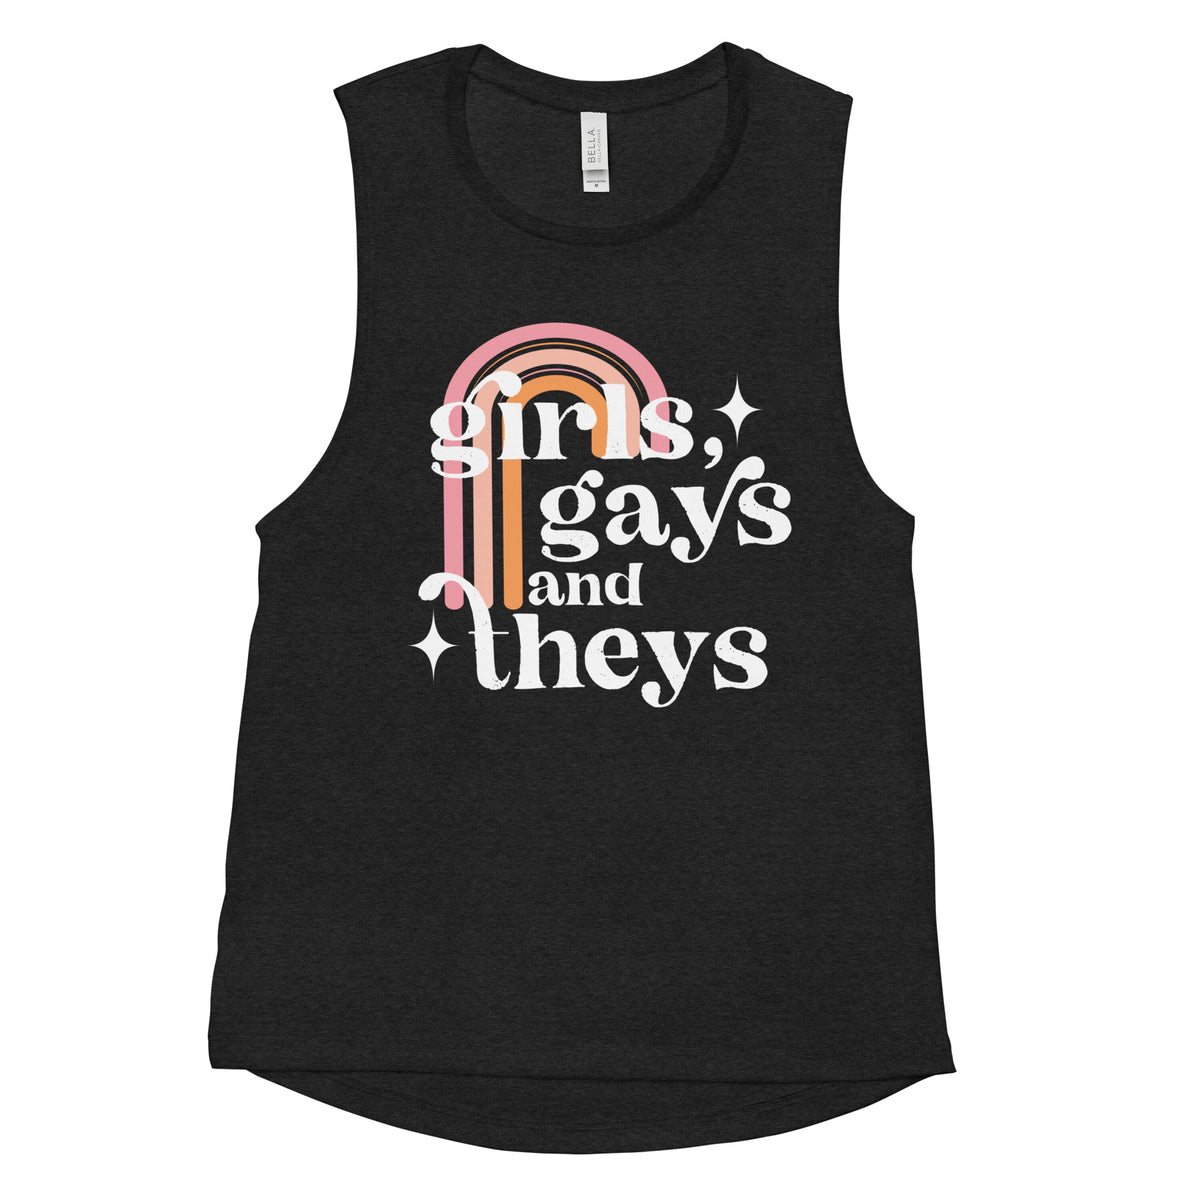 Girls Gays and Theys Women's Muscle Tank - Black